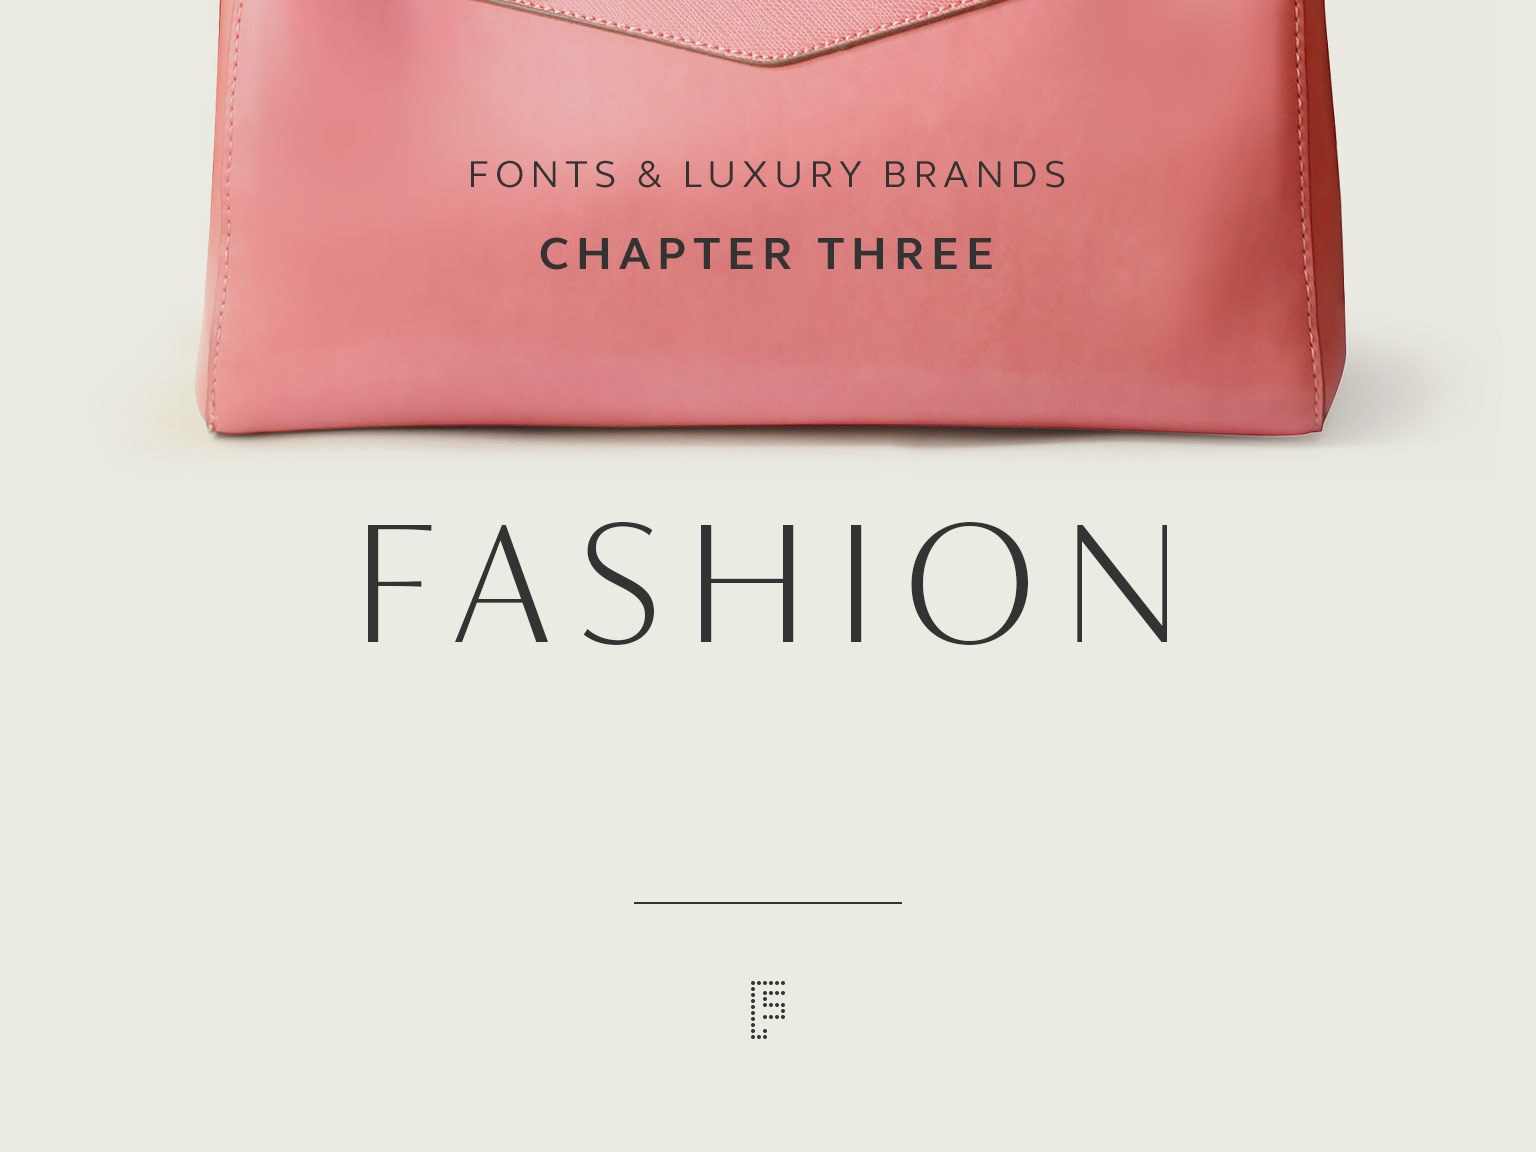 Fonts and luxury brands: Fashion.